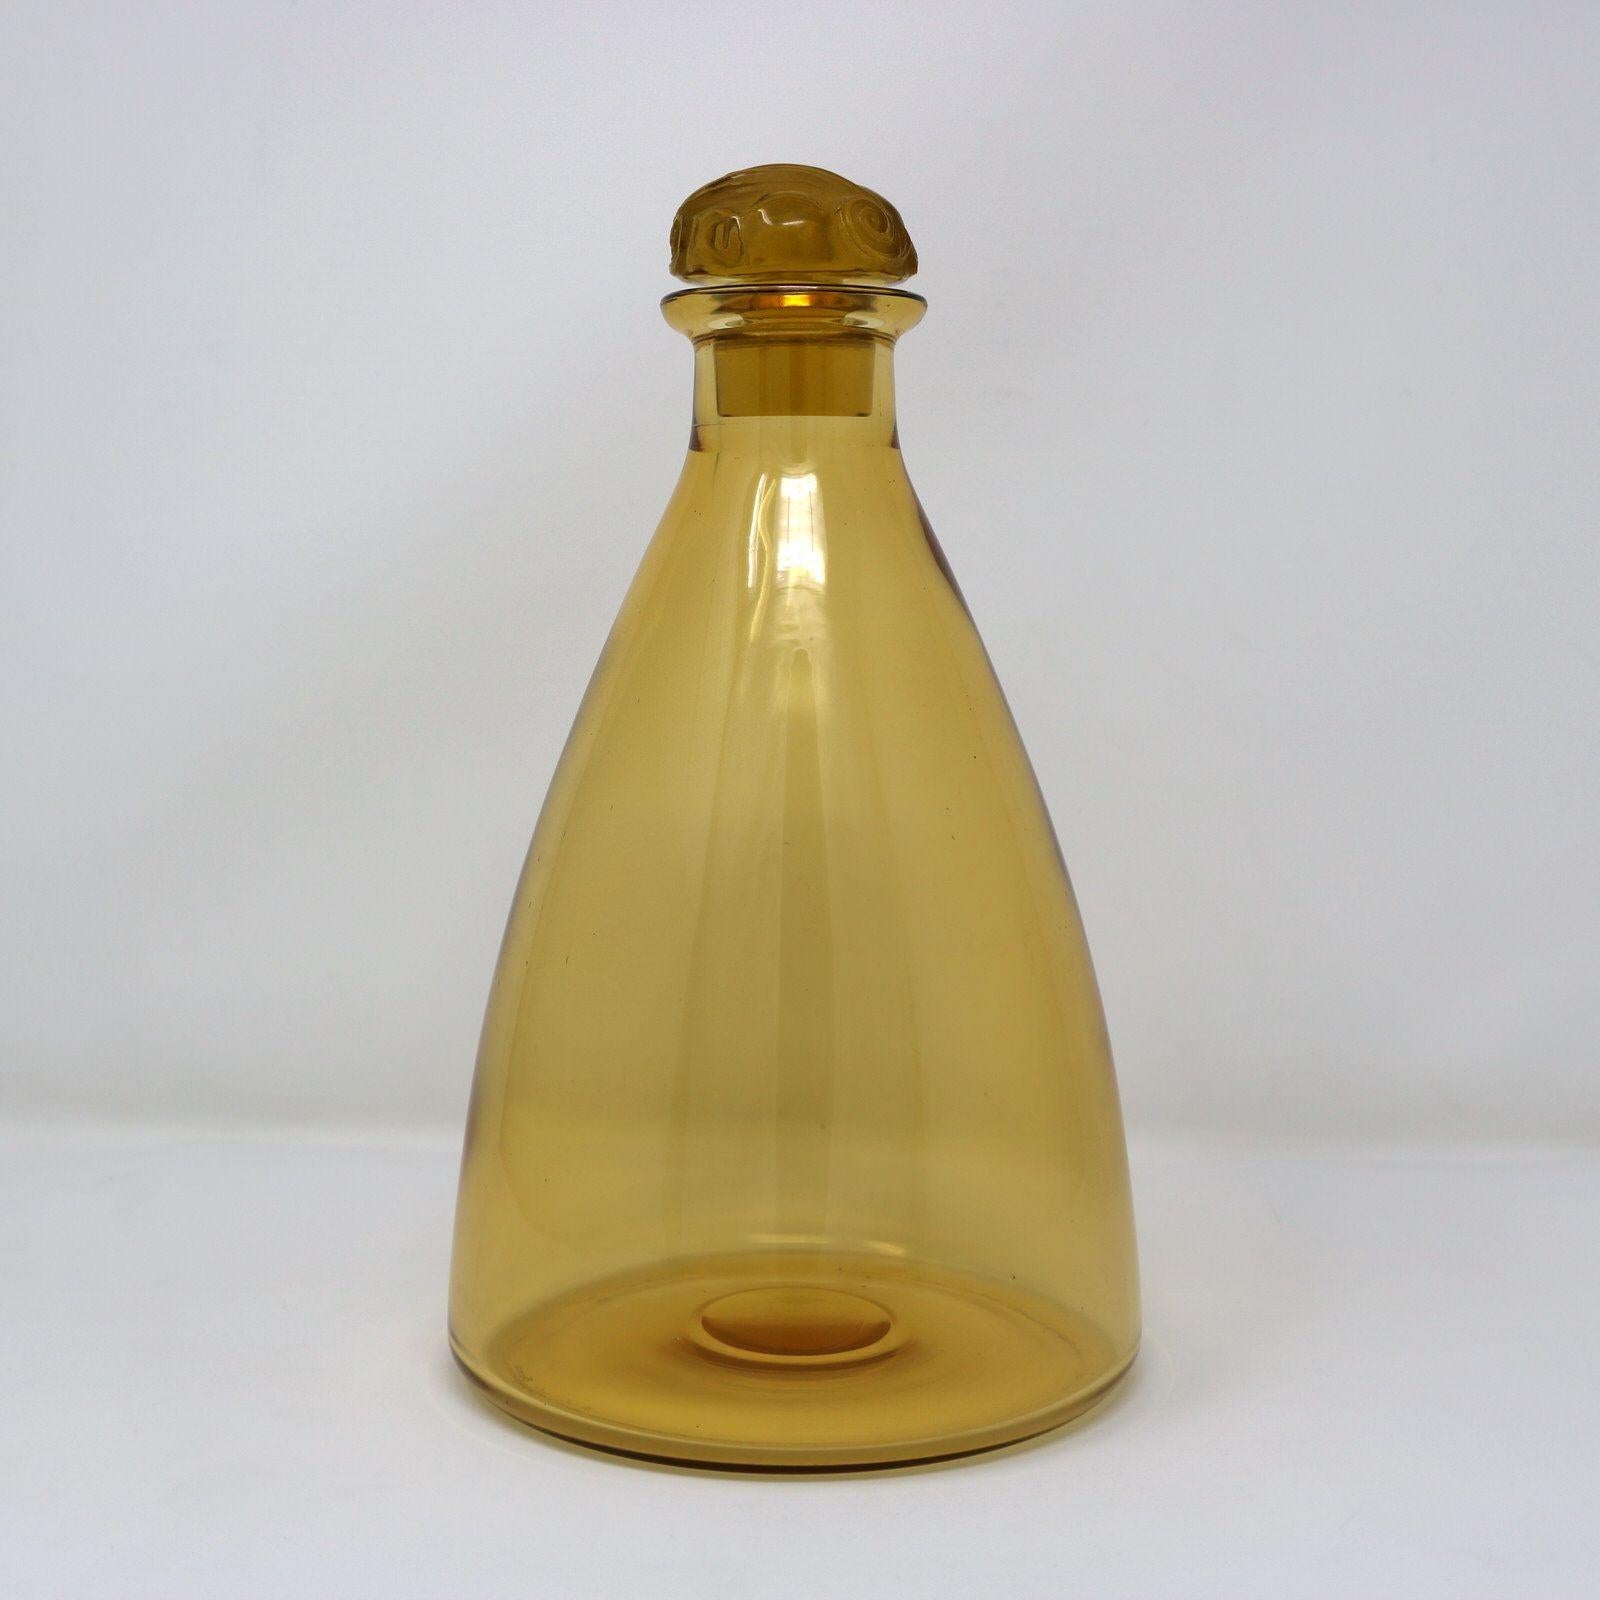 Rene Lalique yellow-amber glass 'Marienthal' decanter. Has a conical shaped bottle. The clear and frosted glass stopper has grapes and vine decoration. Inscribed makers mark, 'R Lalique France' and '5126' to the base. Book reference: 'R. LALIQUE